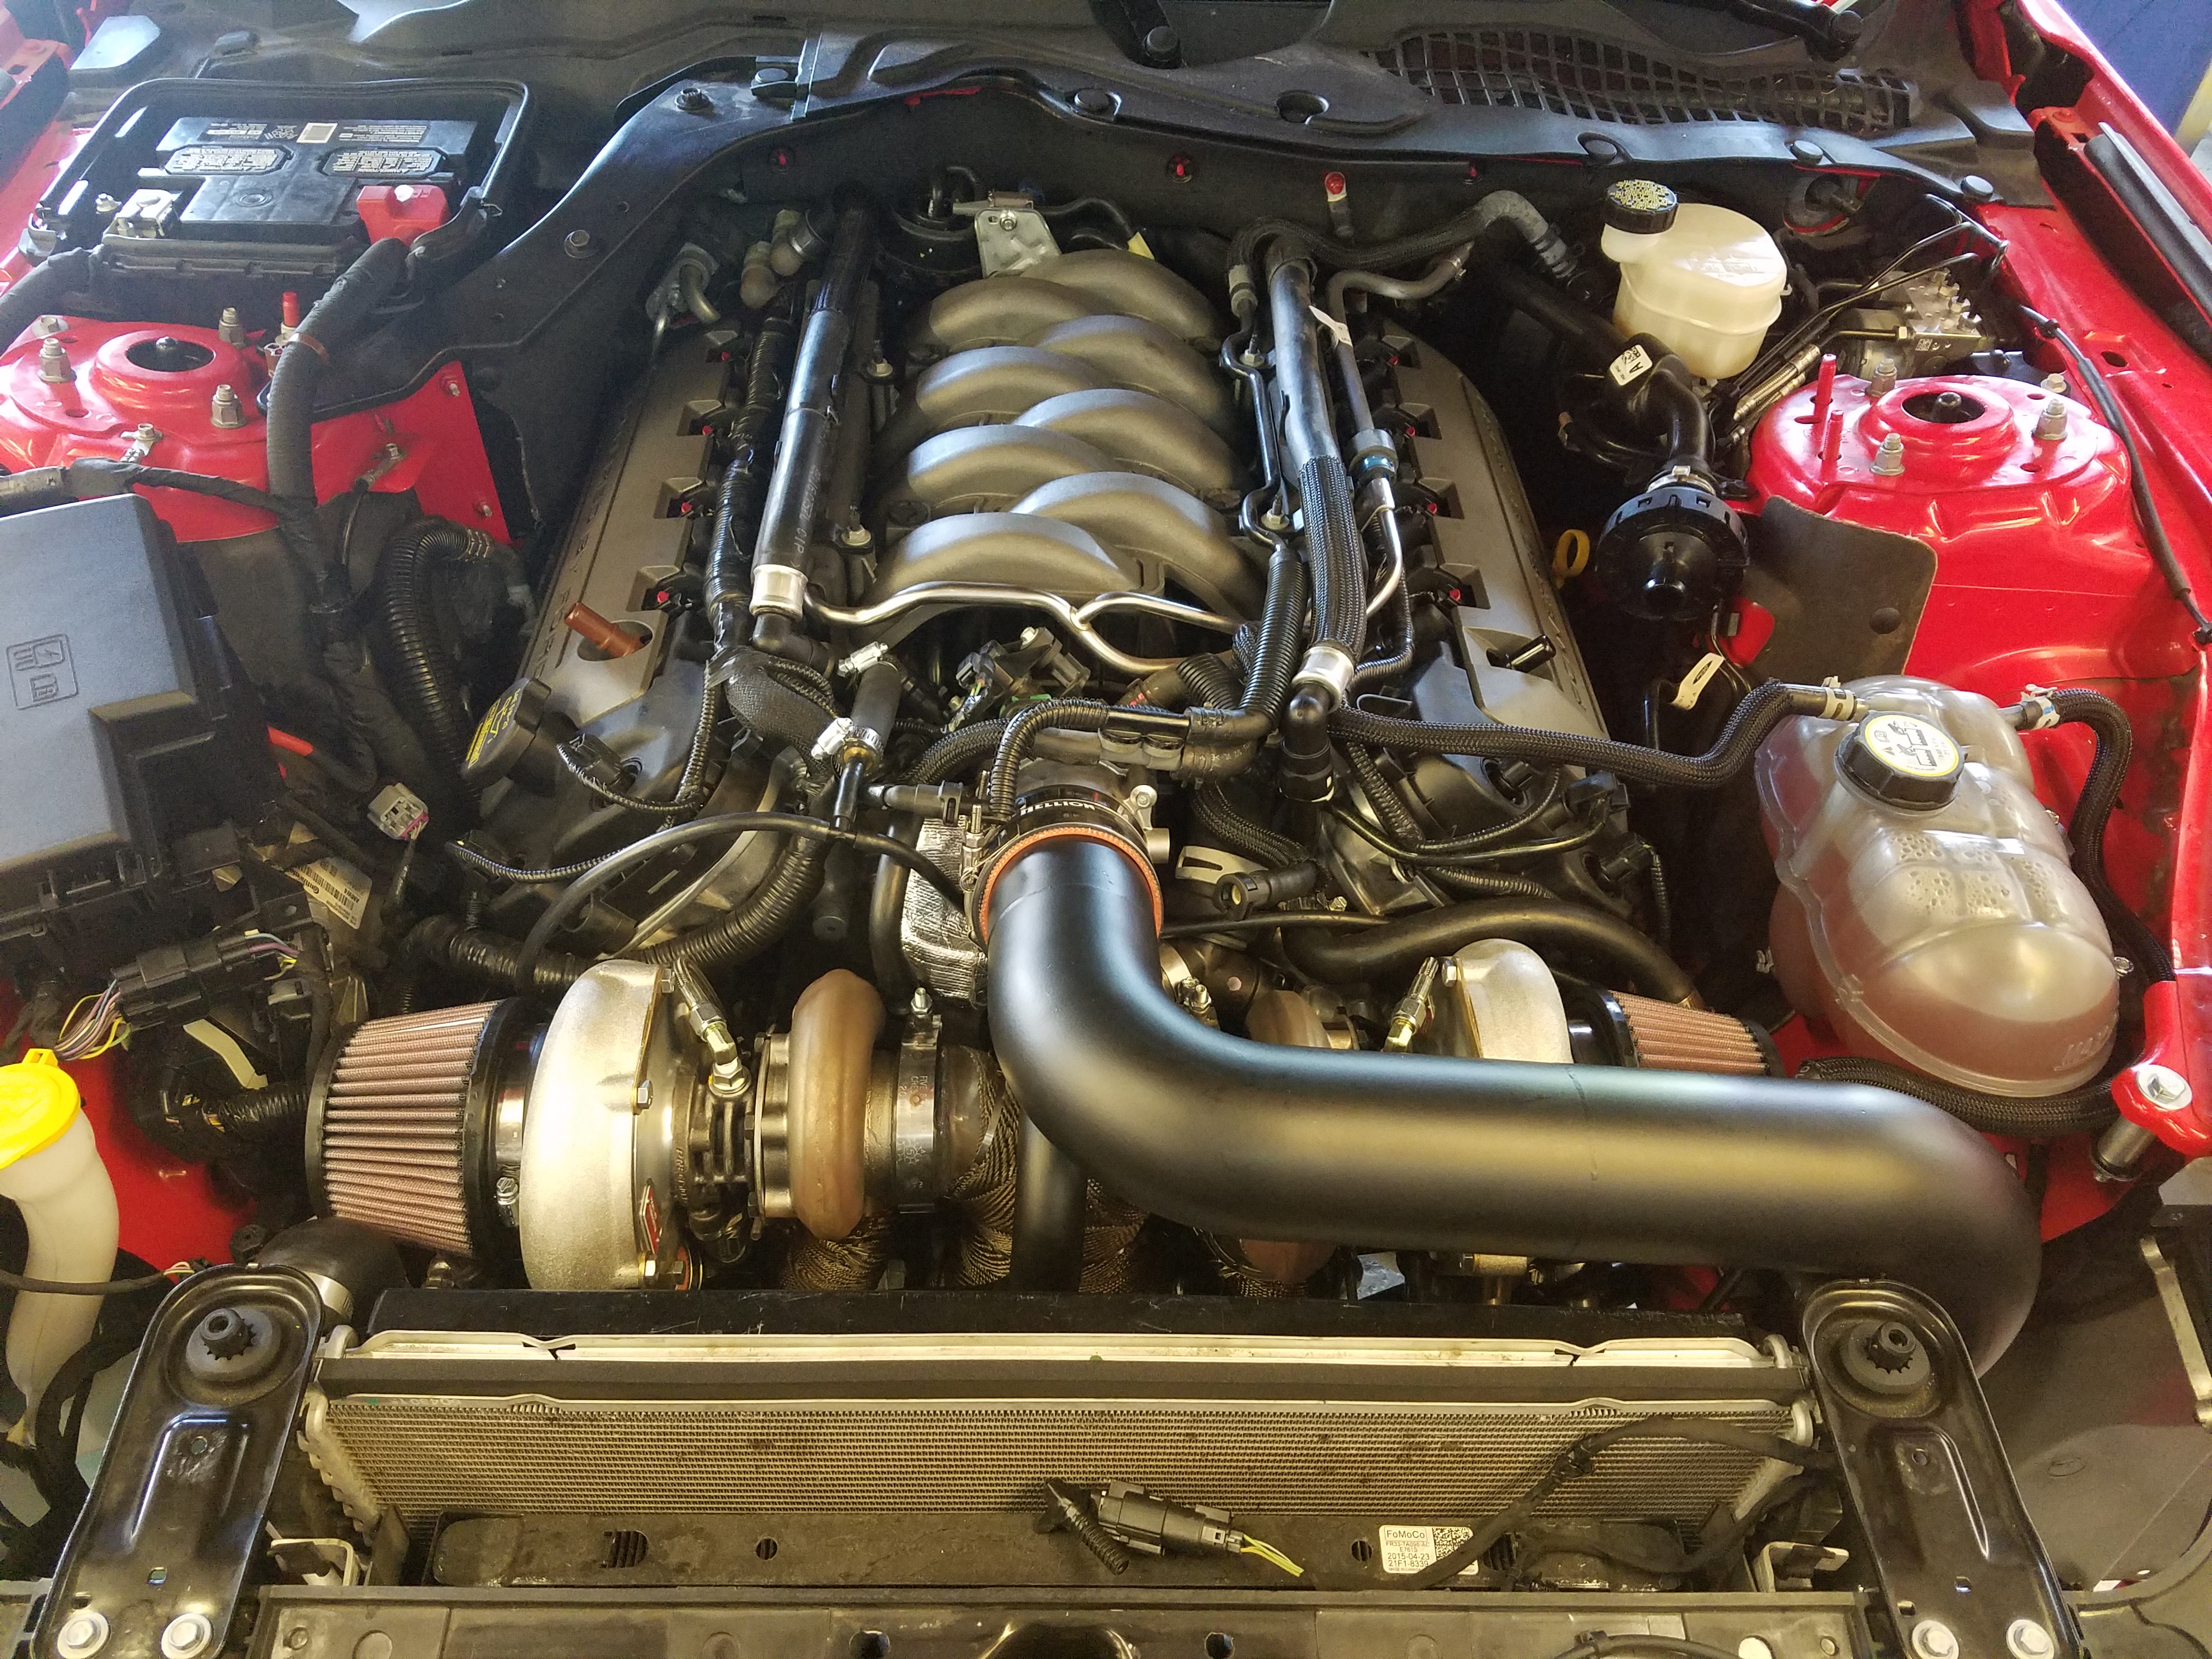 KP 2015 Ford Mustang GT Twin Turbo project.